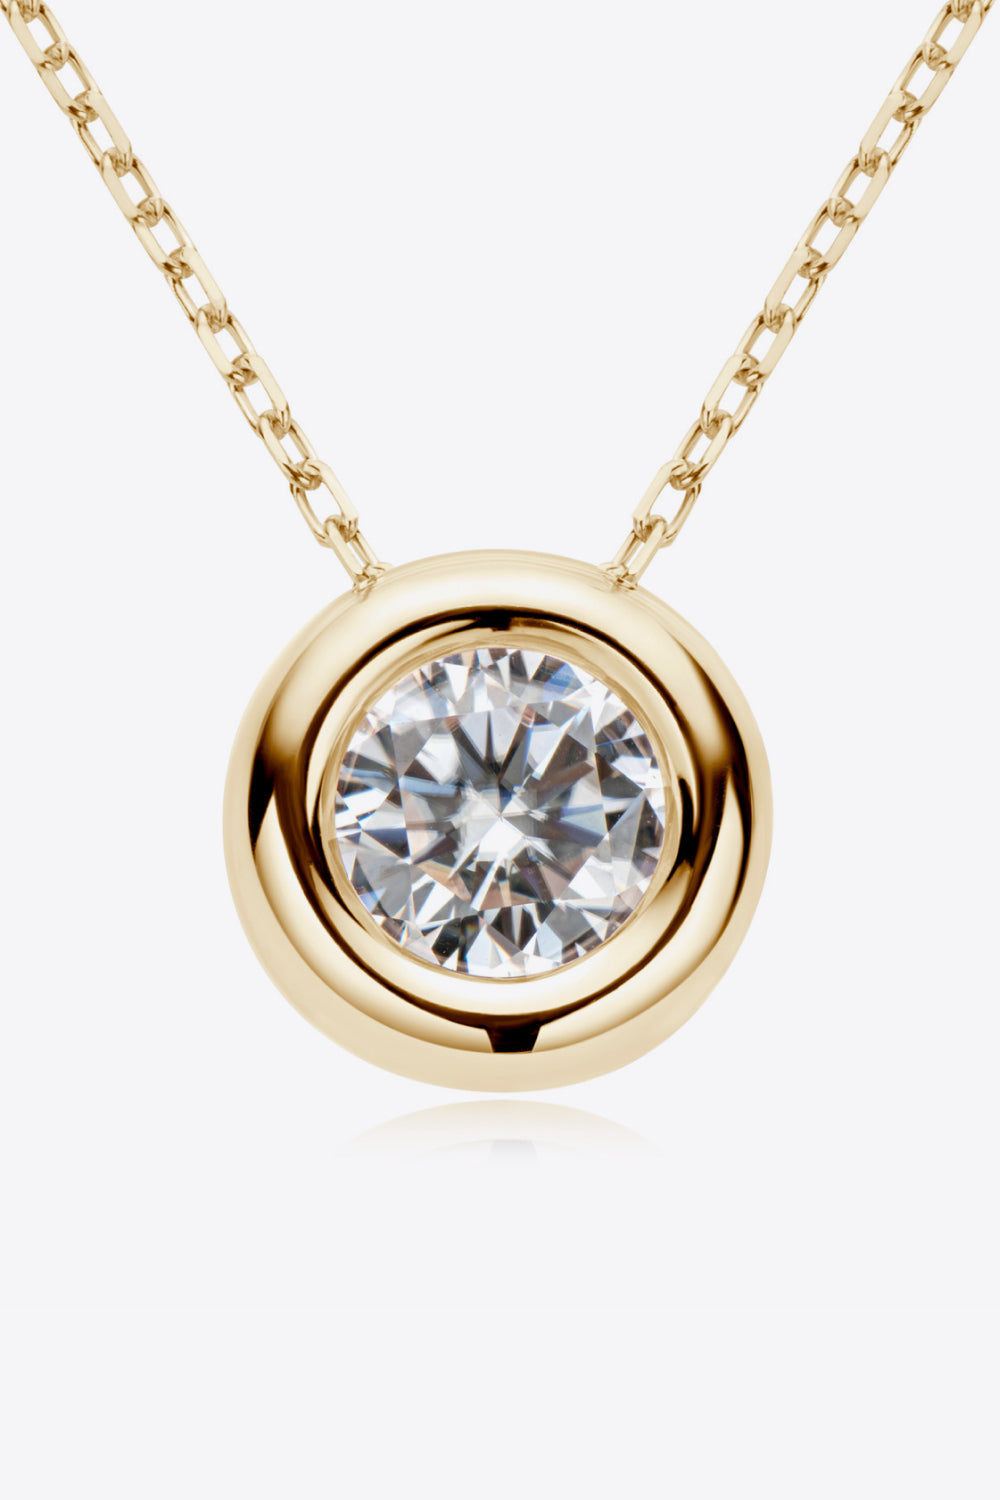 Adored 1 Carat Moissanite Pendant 925 Sterling Silver Necklace (Platinum-Plated Fine Silver)